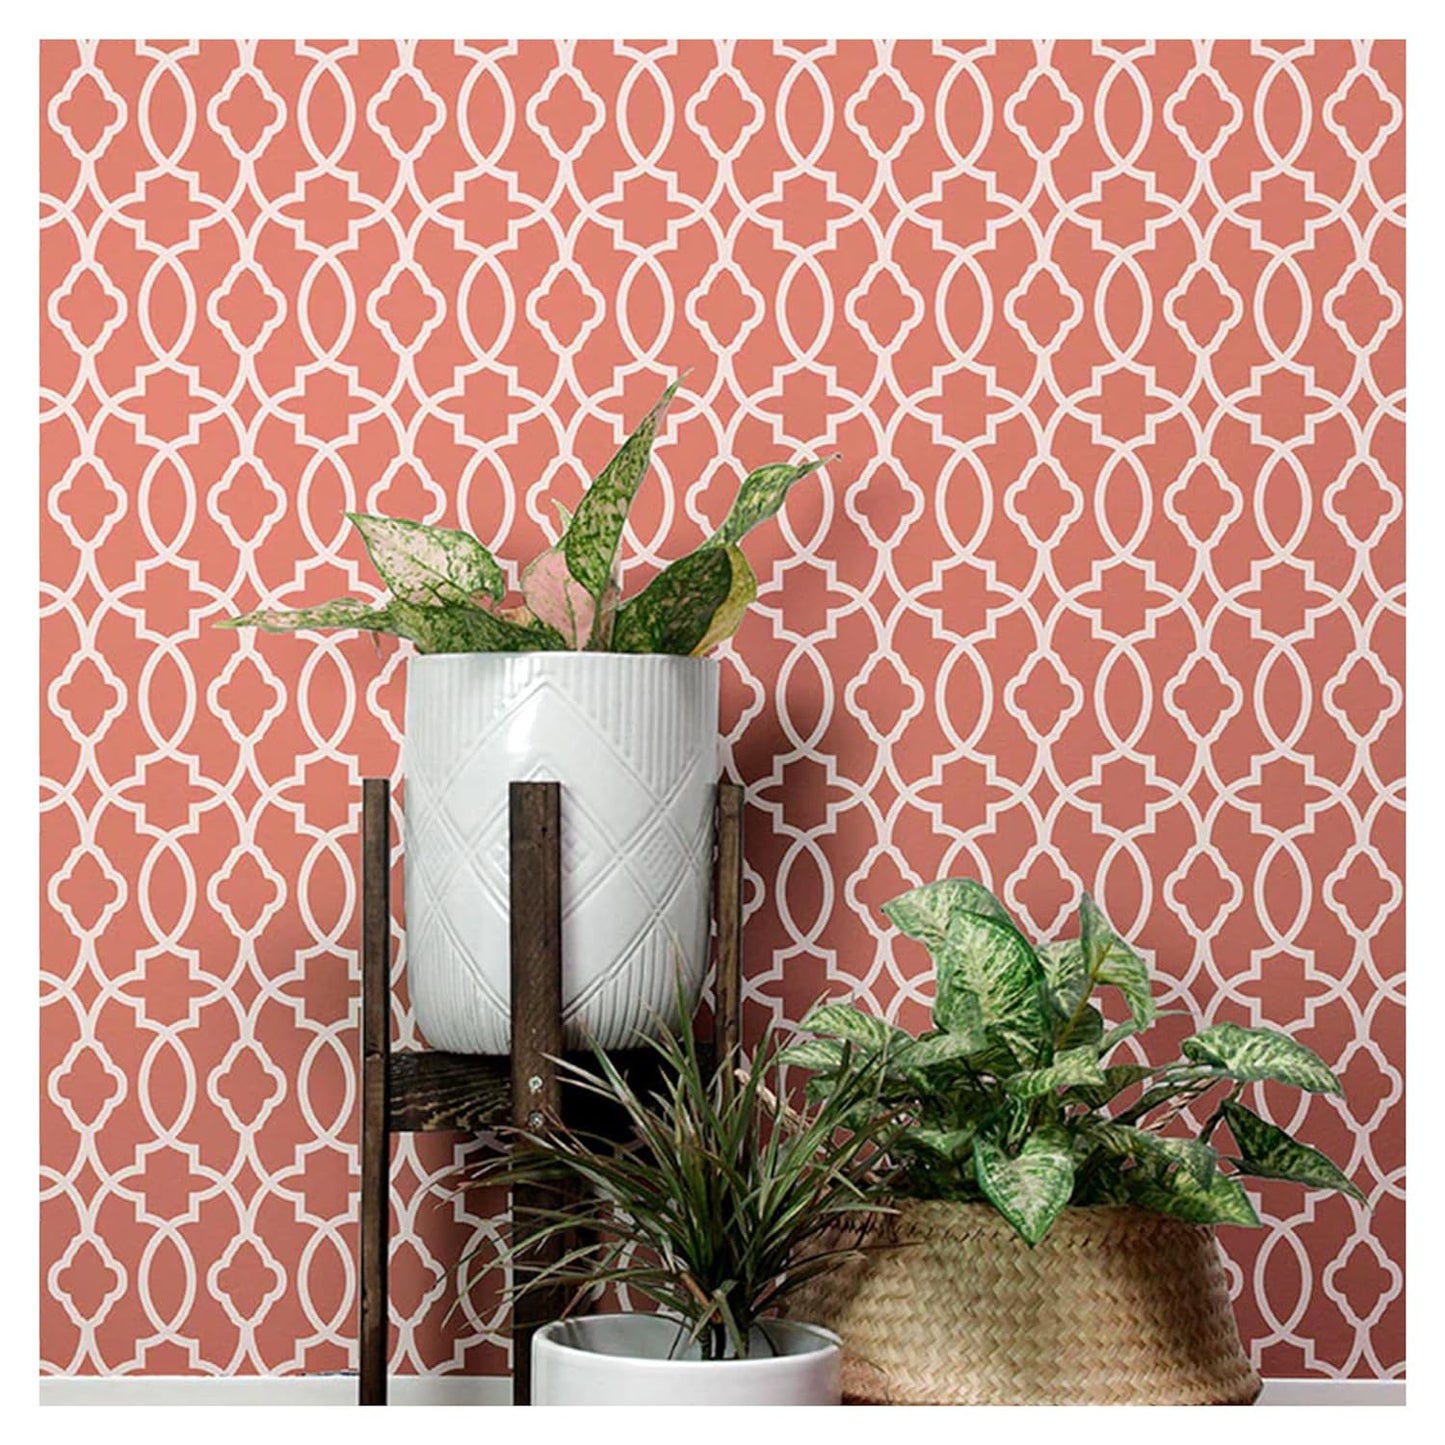 Allover Lattice Latest Stencils for Wall Painting - Pack of 1,Sheet Size 24 X 36 Inch/Design Size 21 X 33 Inch - Large